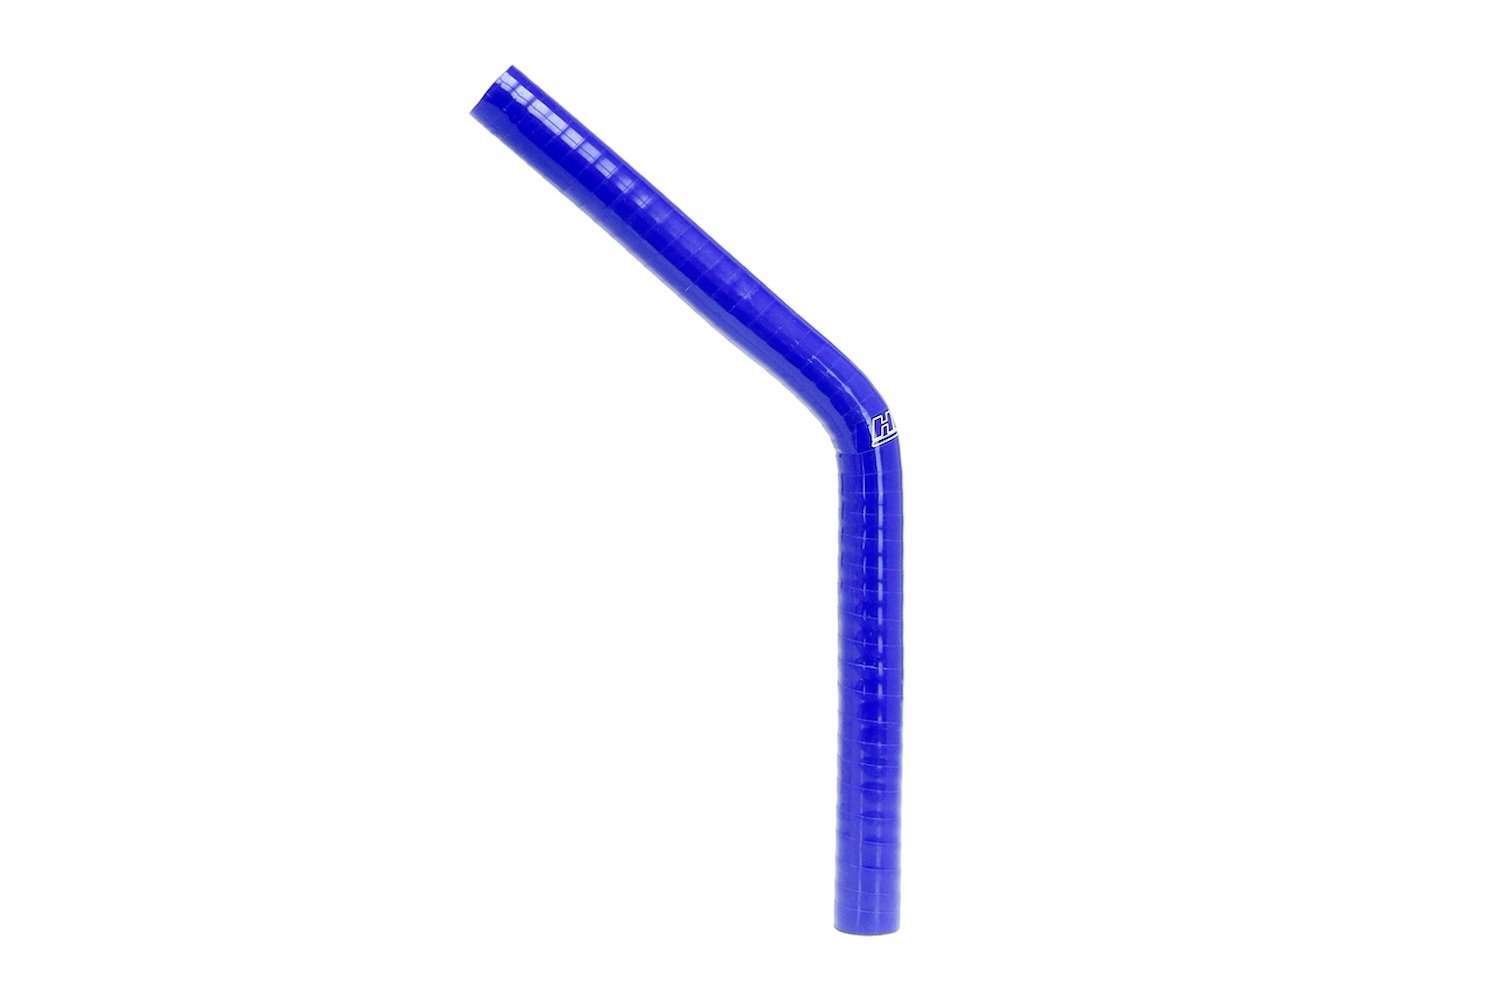 HTSEC45-150-BLUE Silicone 45-Degree Elbow Coupler Hose, High-Temp 4-Ply Reinforced, 1-1/2 in. ID, Blue